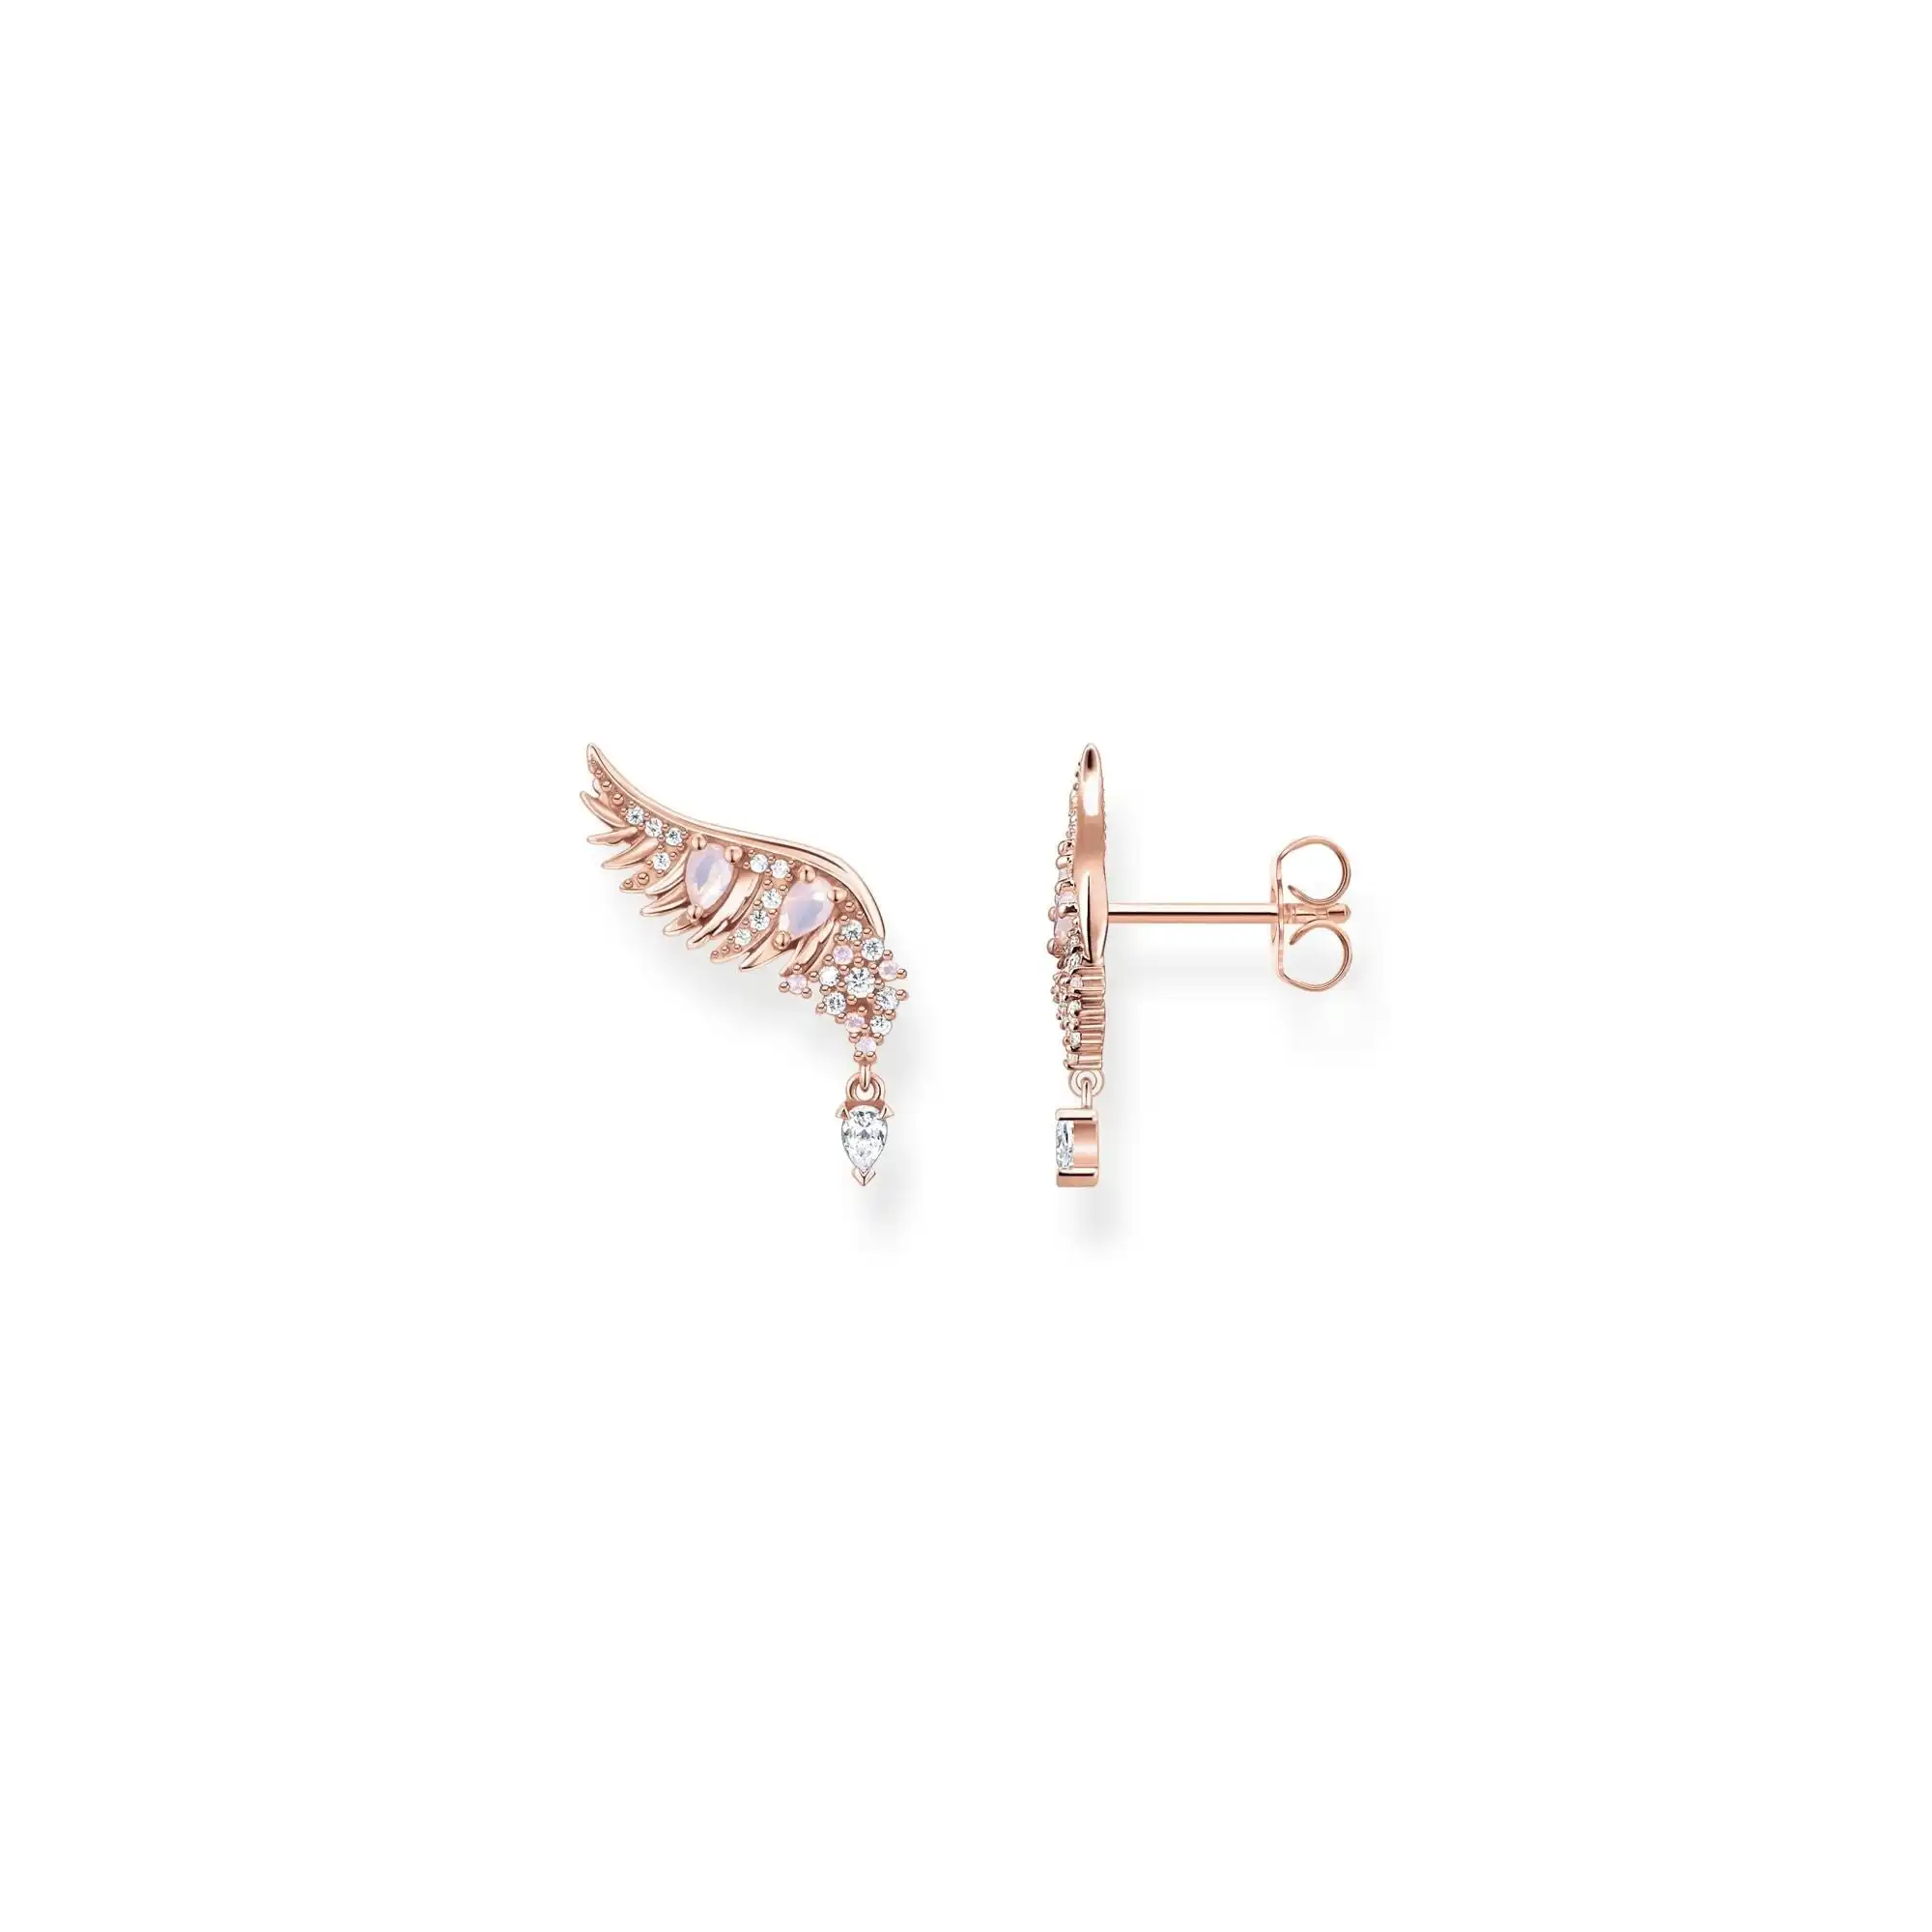 Thomas Sabo Ear studs phoenix wing with pink stones rose gold